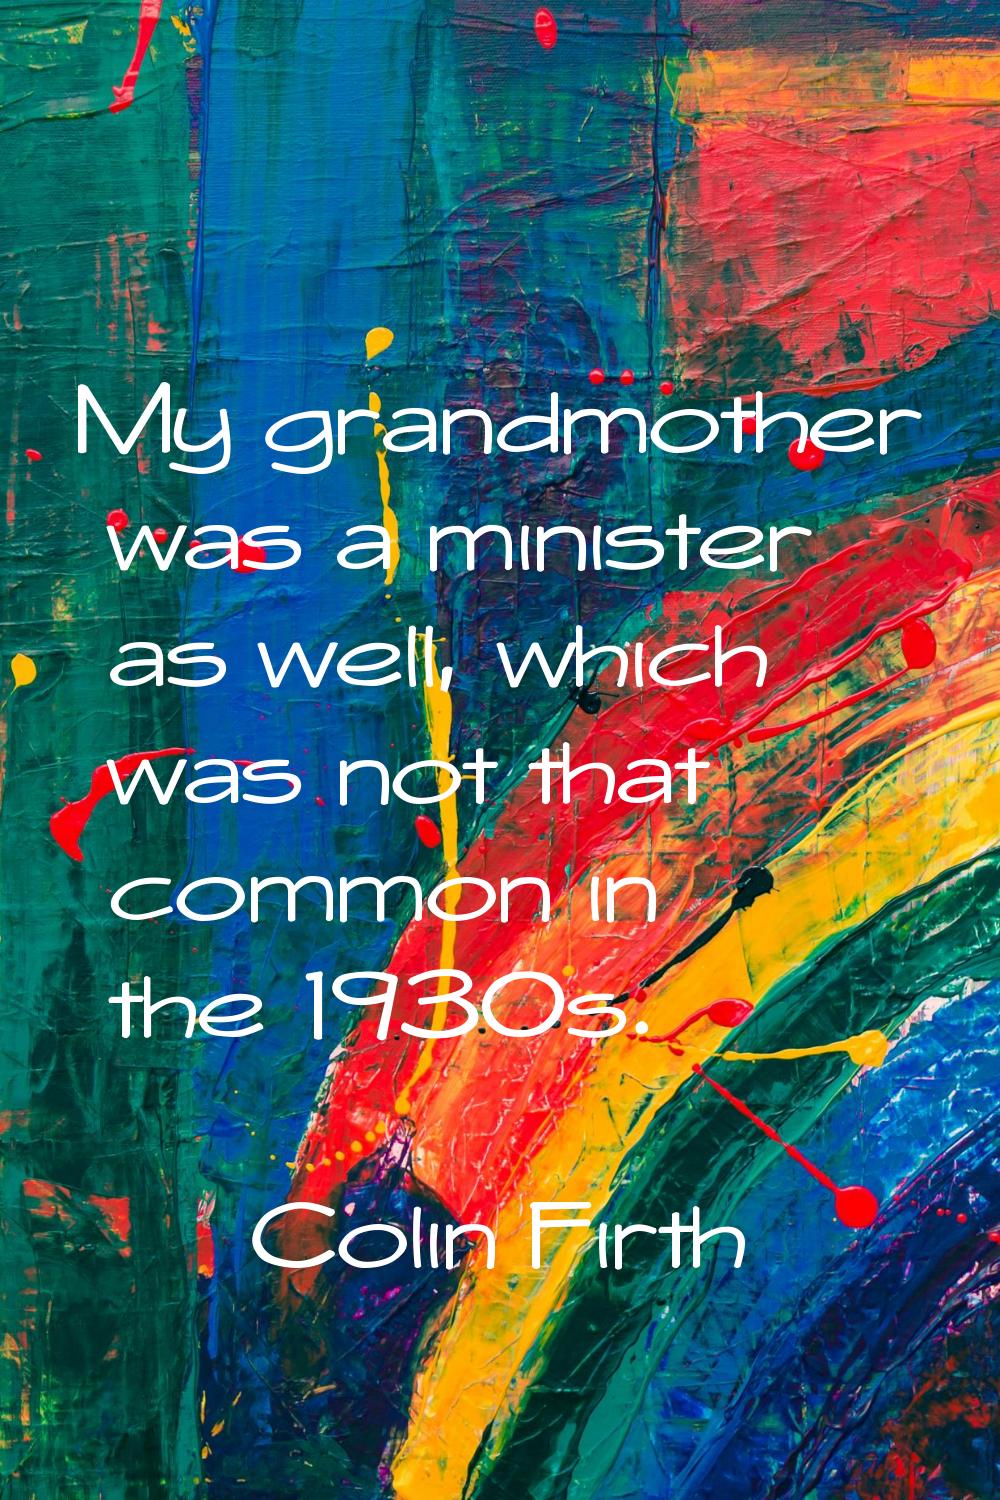 My grandmother was a minister as well, which was not that common in the 1930s.